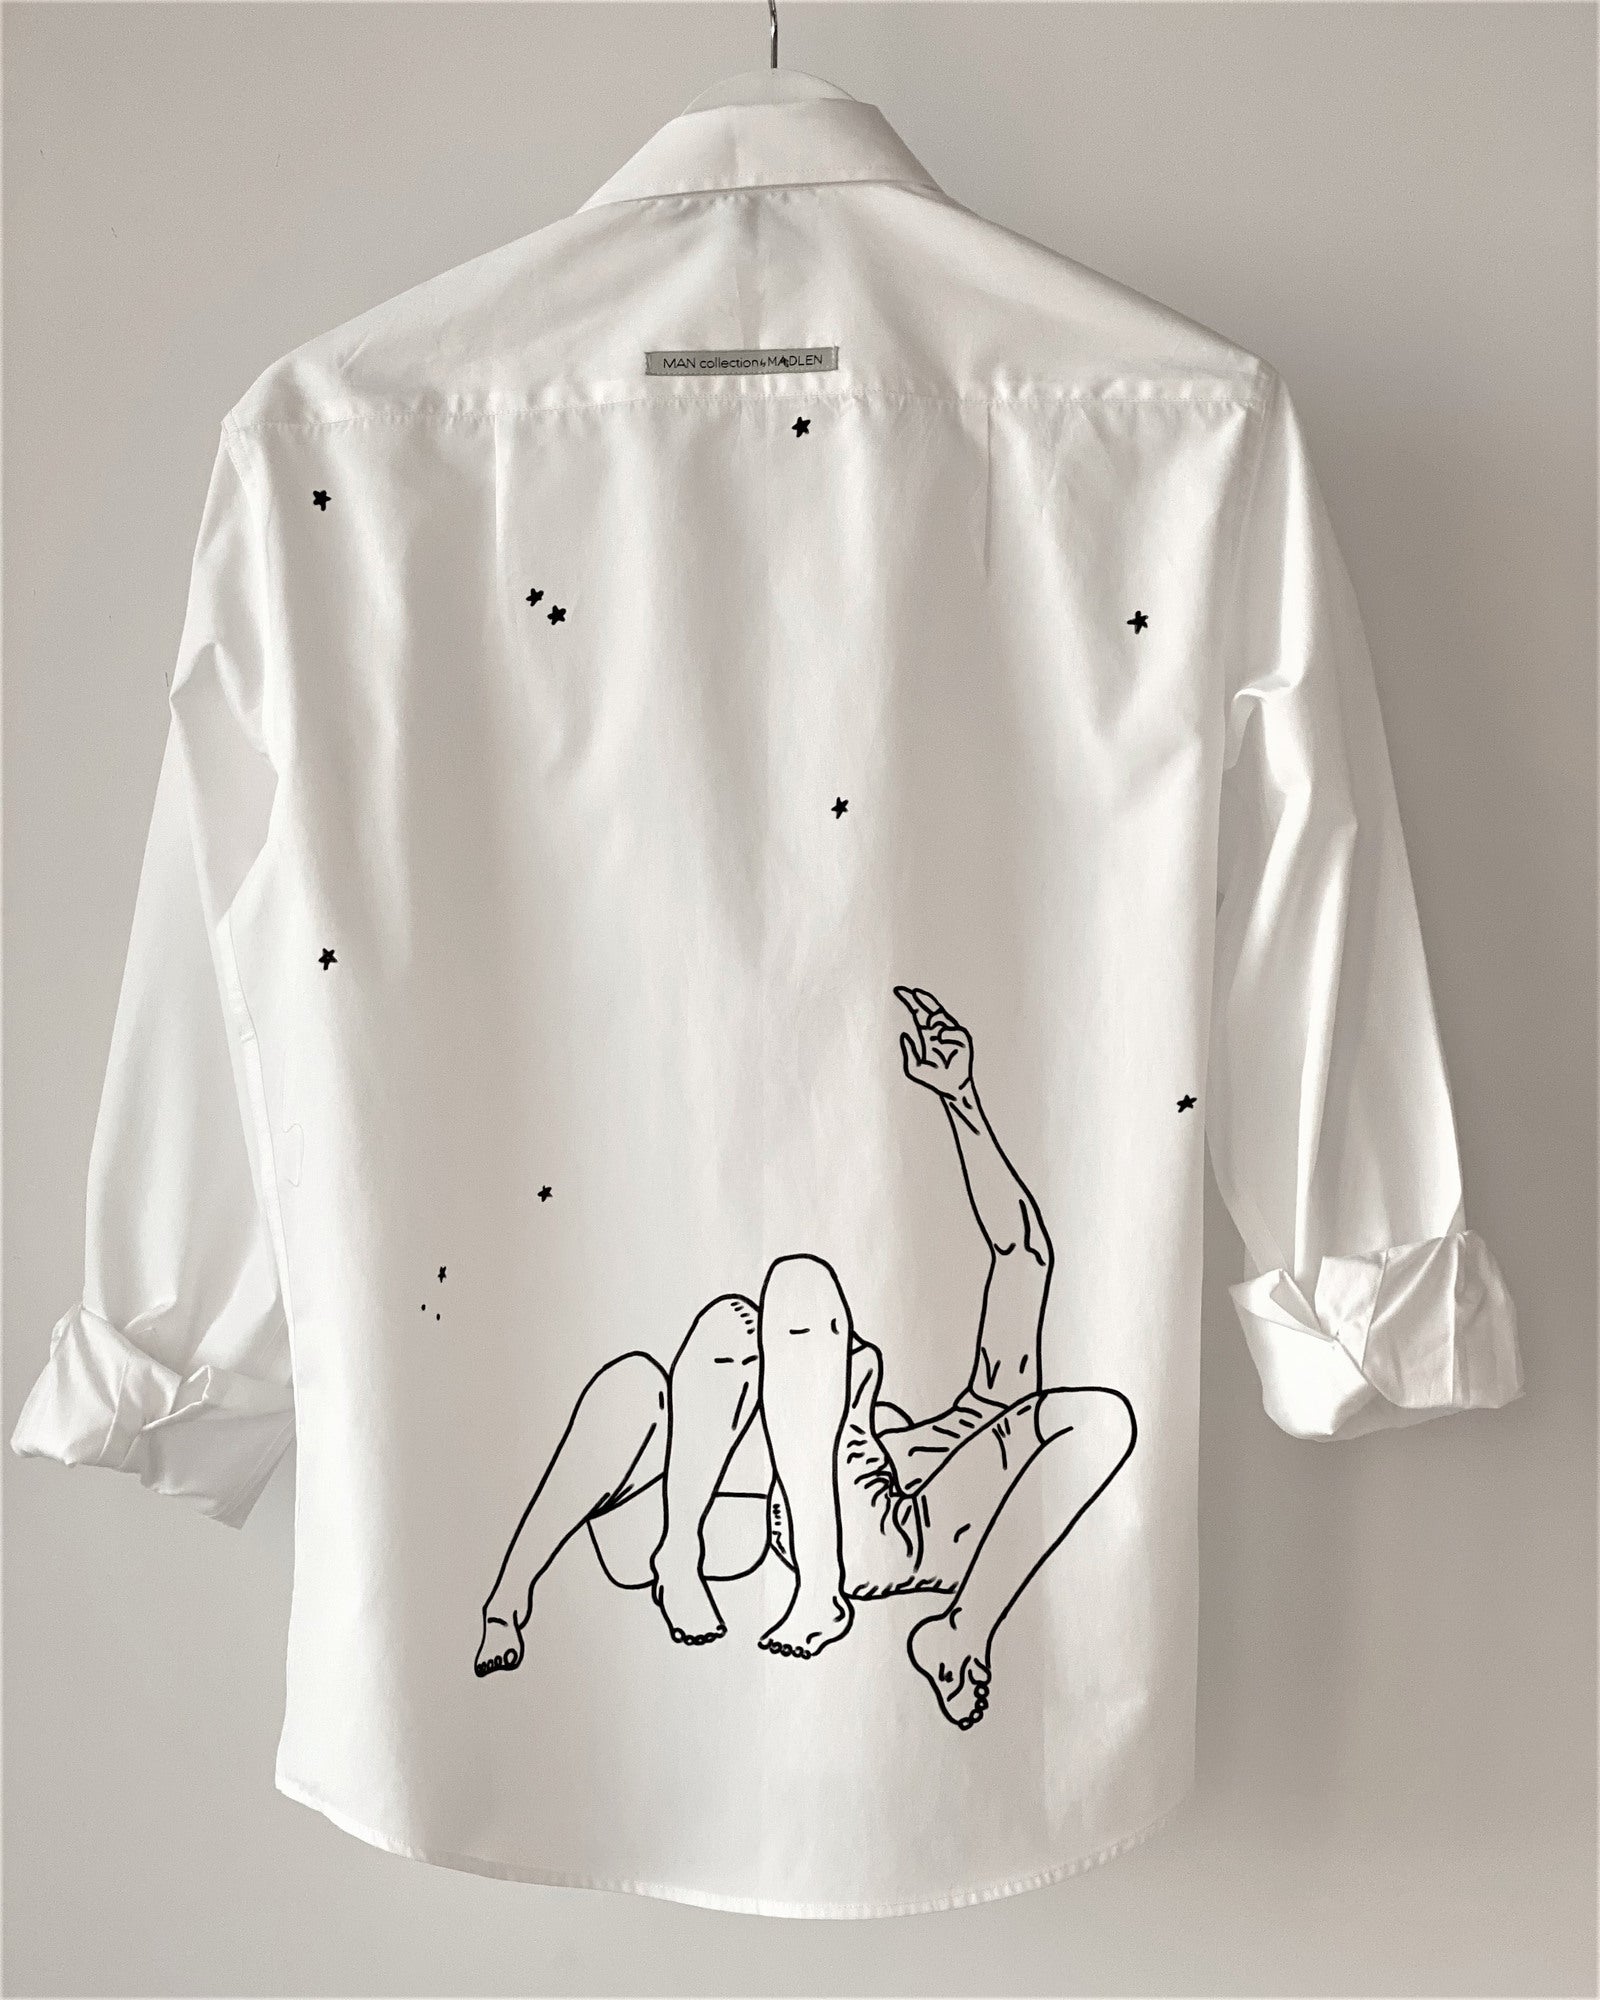 Hand-painted men's shirt "We own the sky"